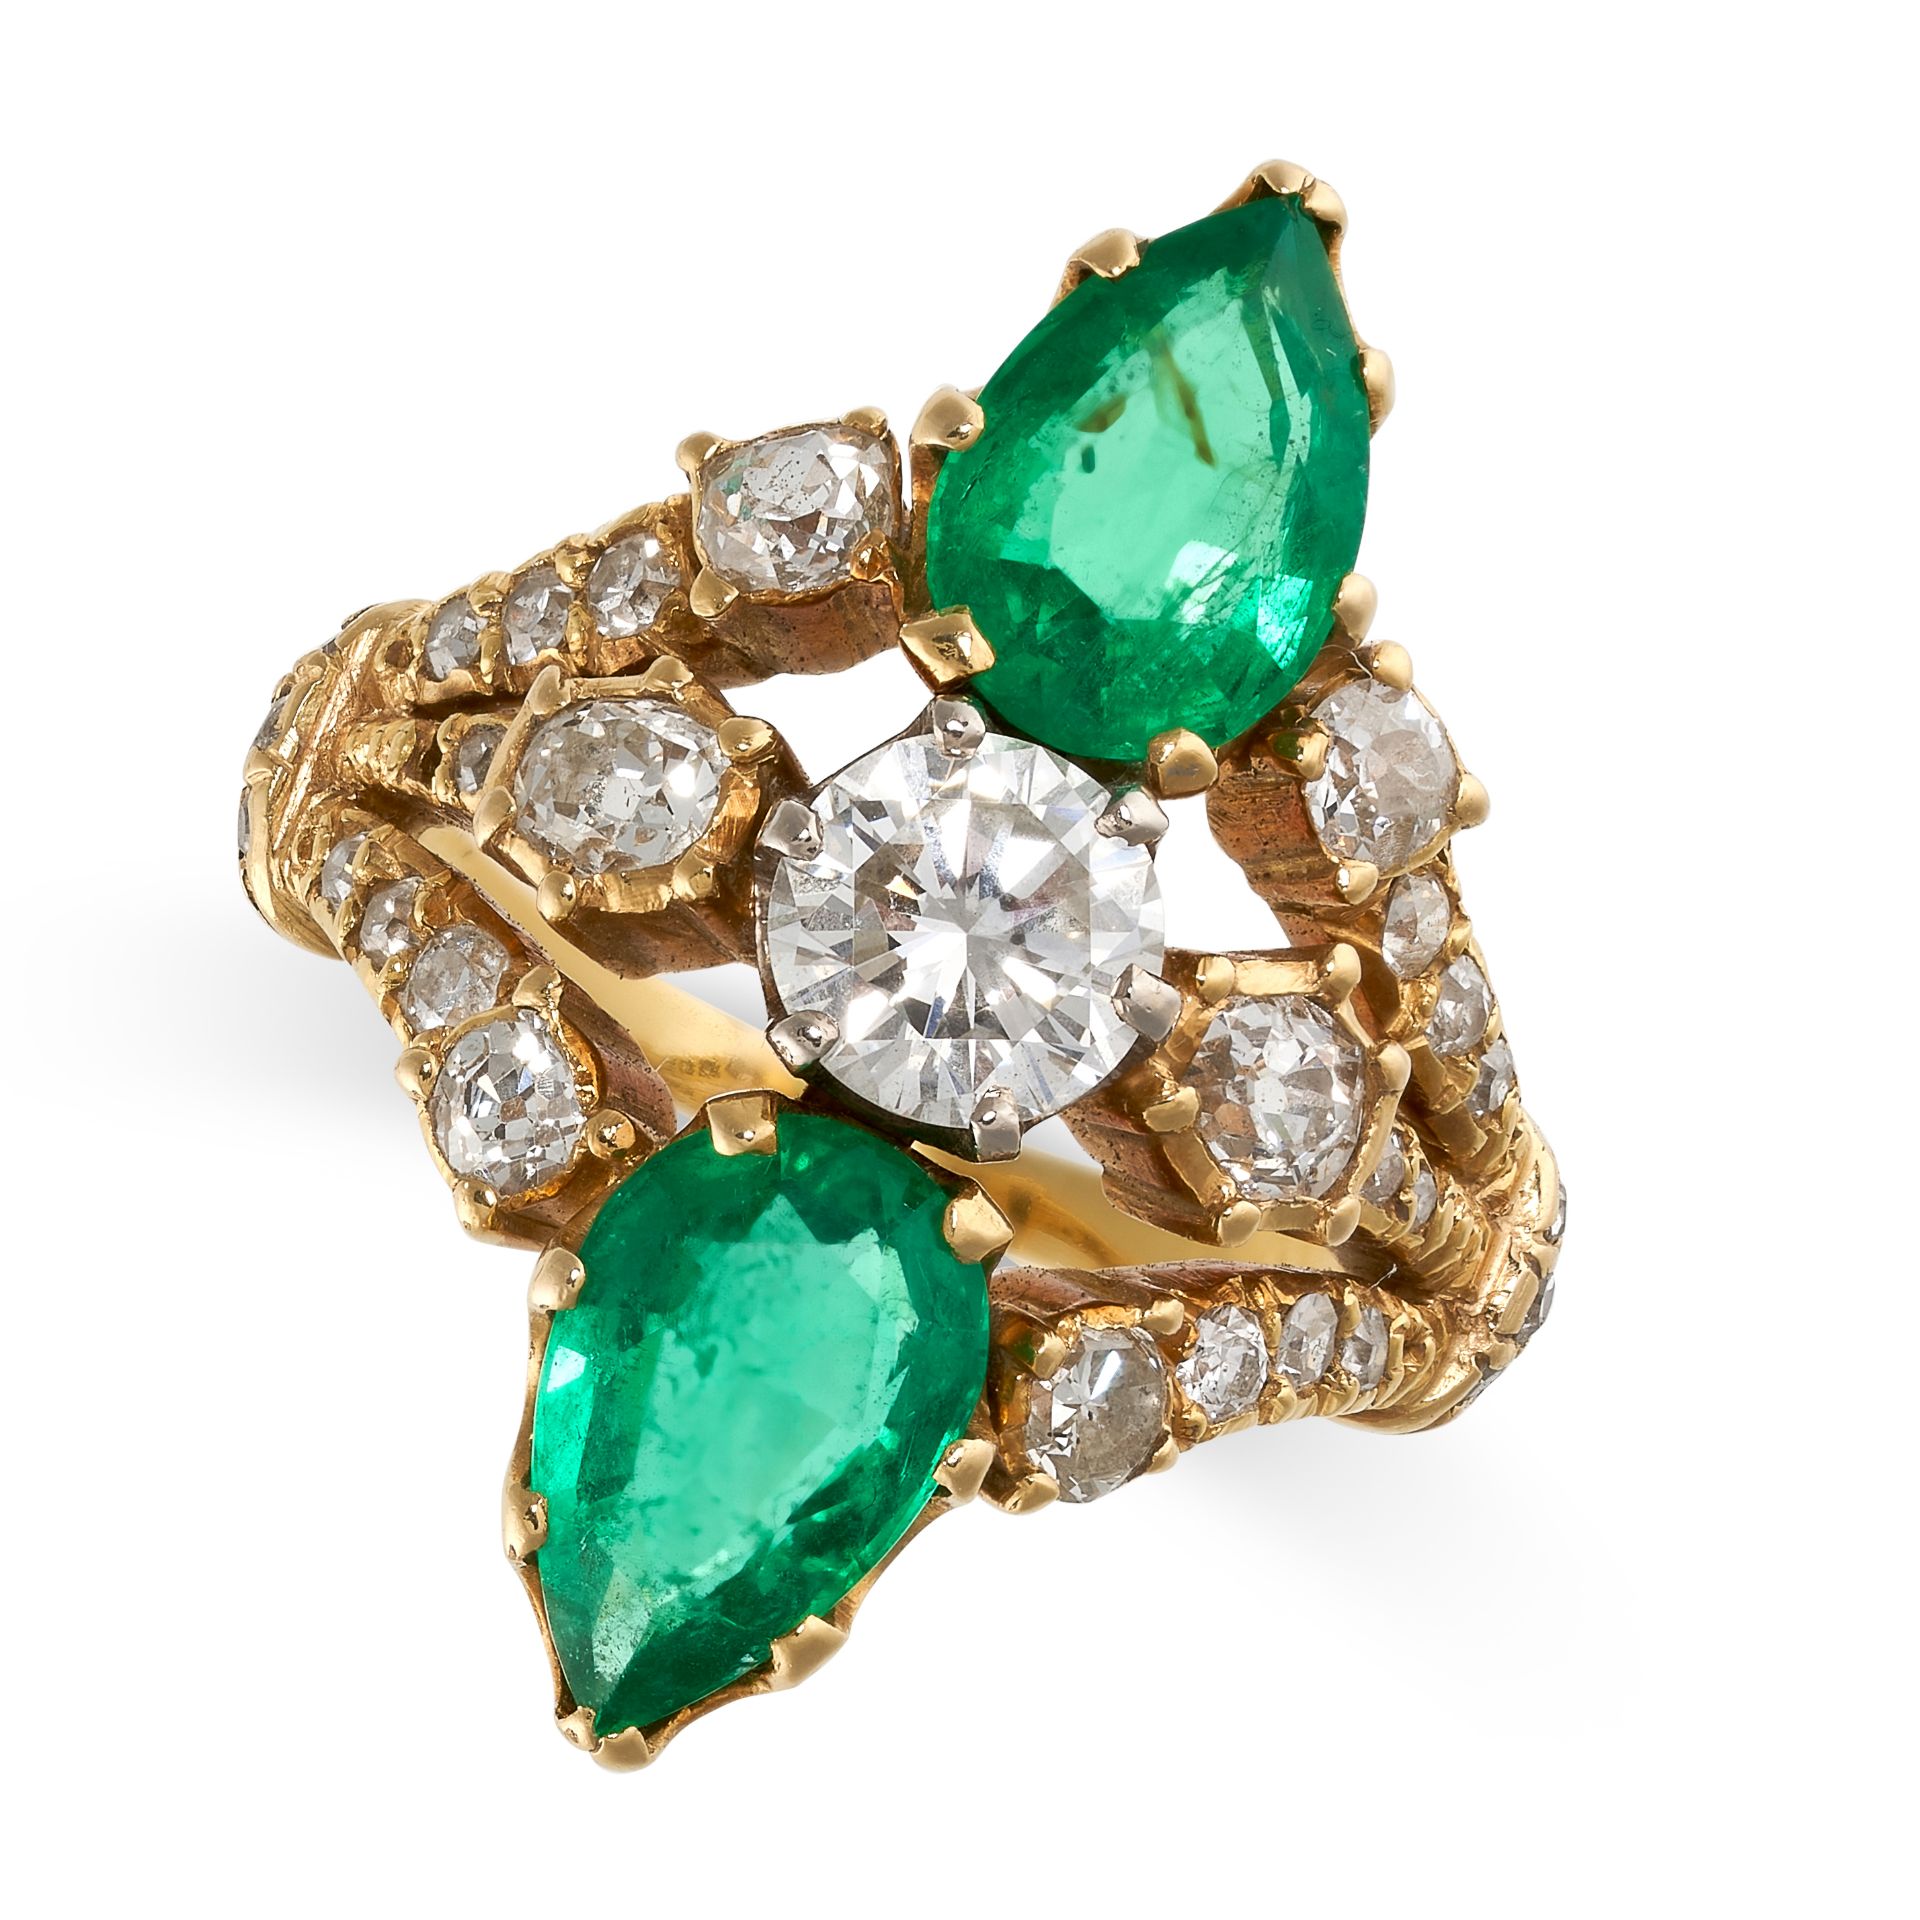 A COLOMBIAN EMERALD AND DIAMOND RING in 18ct yellow gold, set with two pear cut emeralds, both